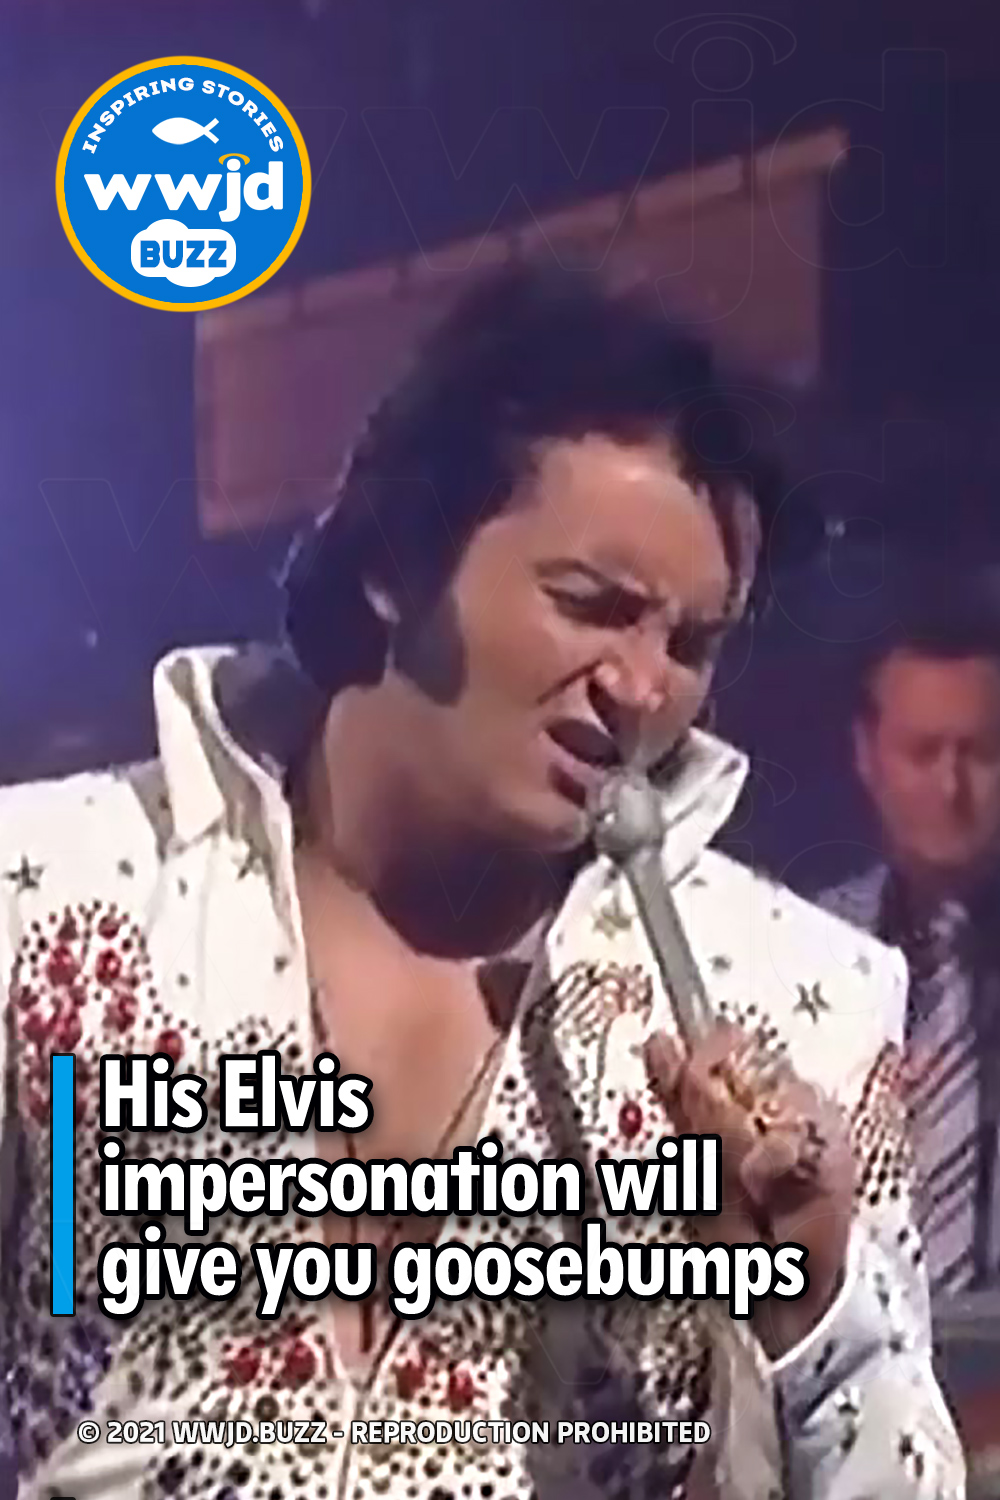 His Elvis impersonation will give you goosebumps